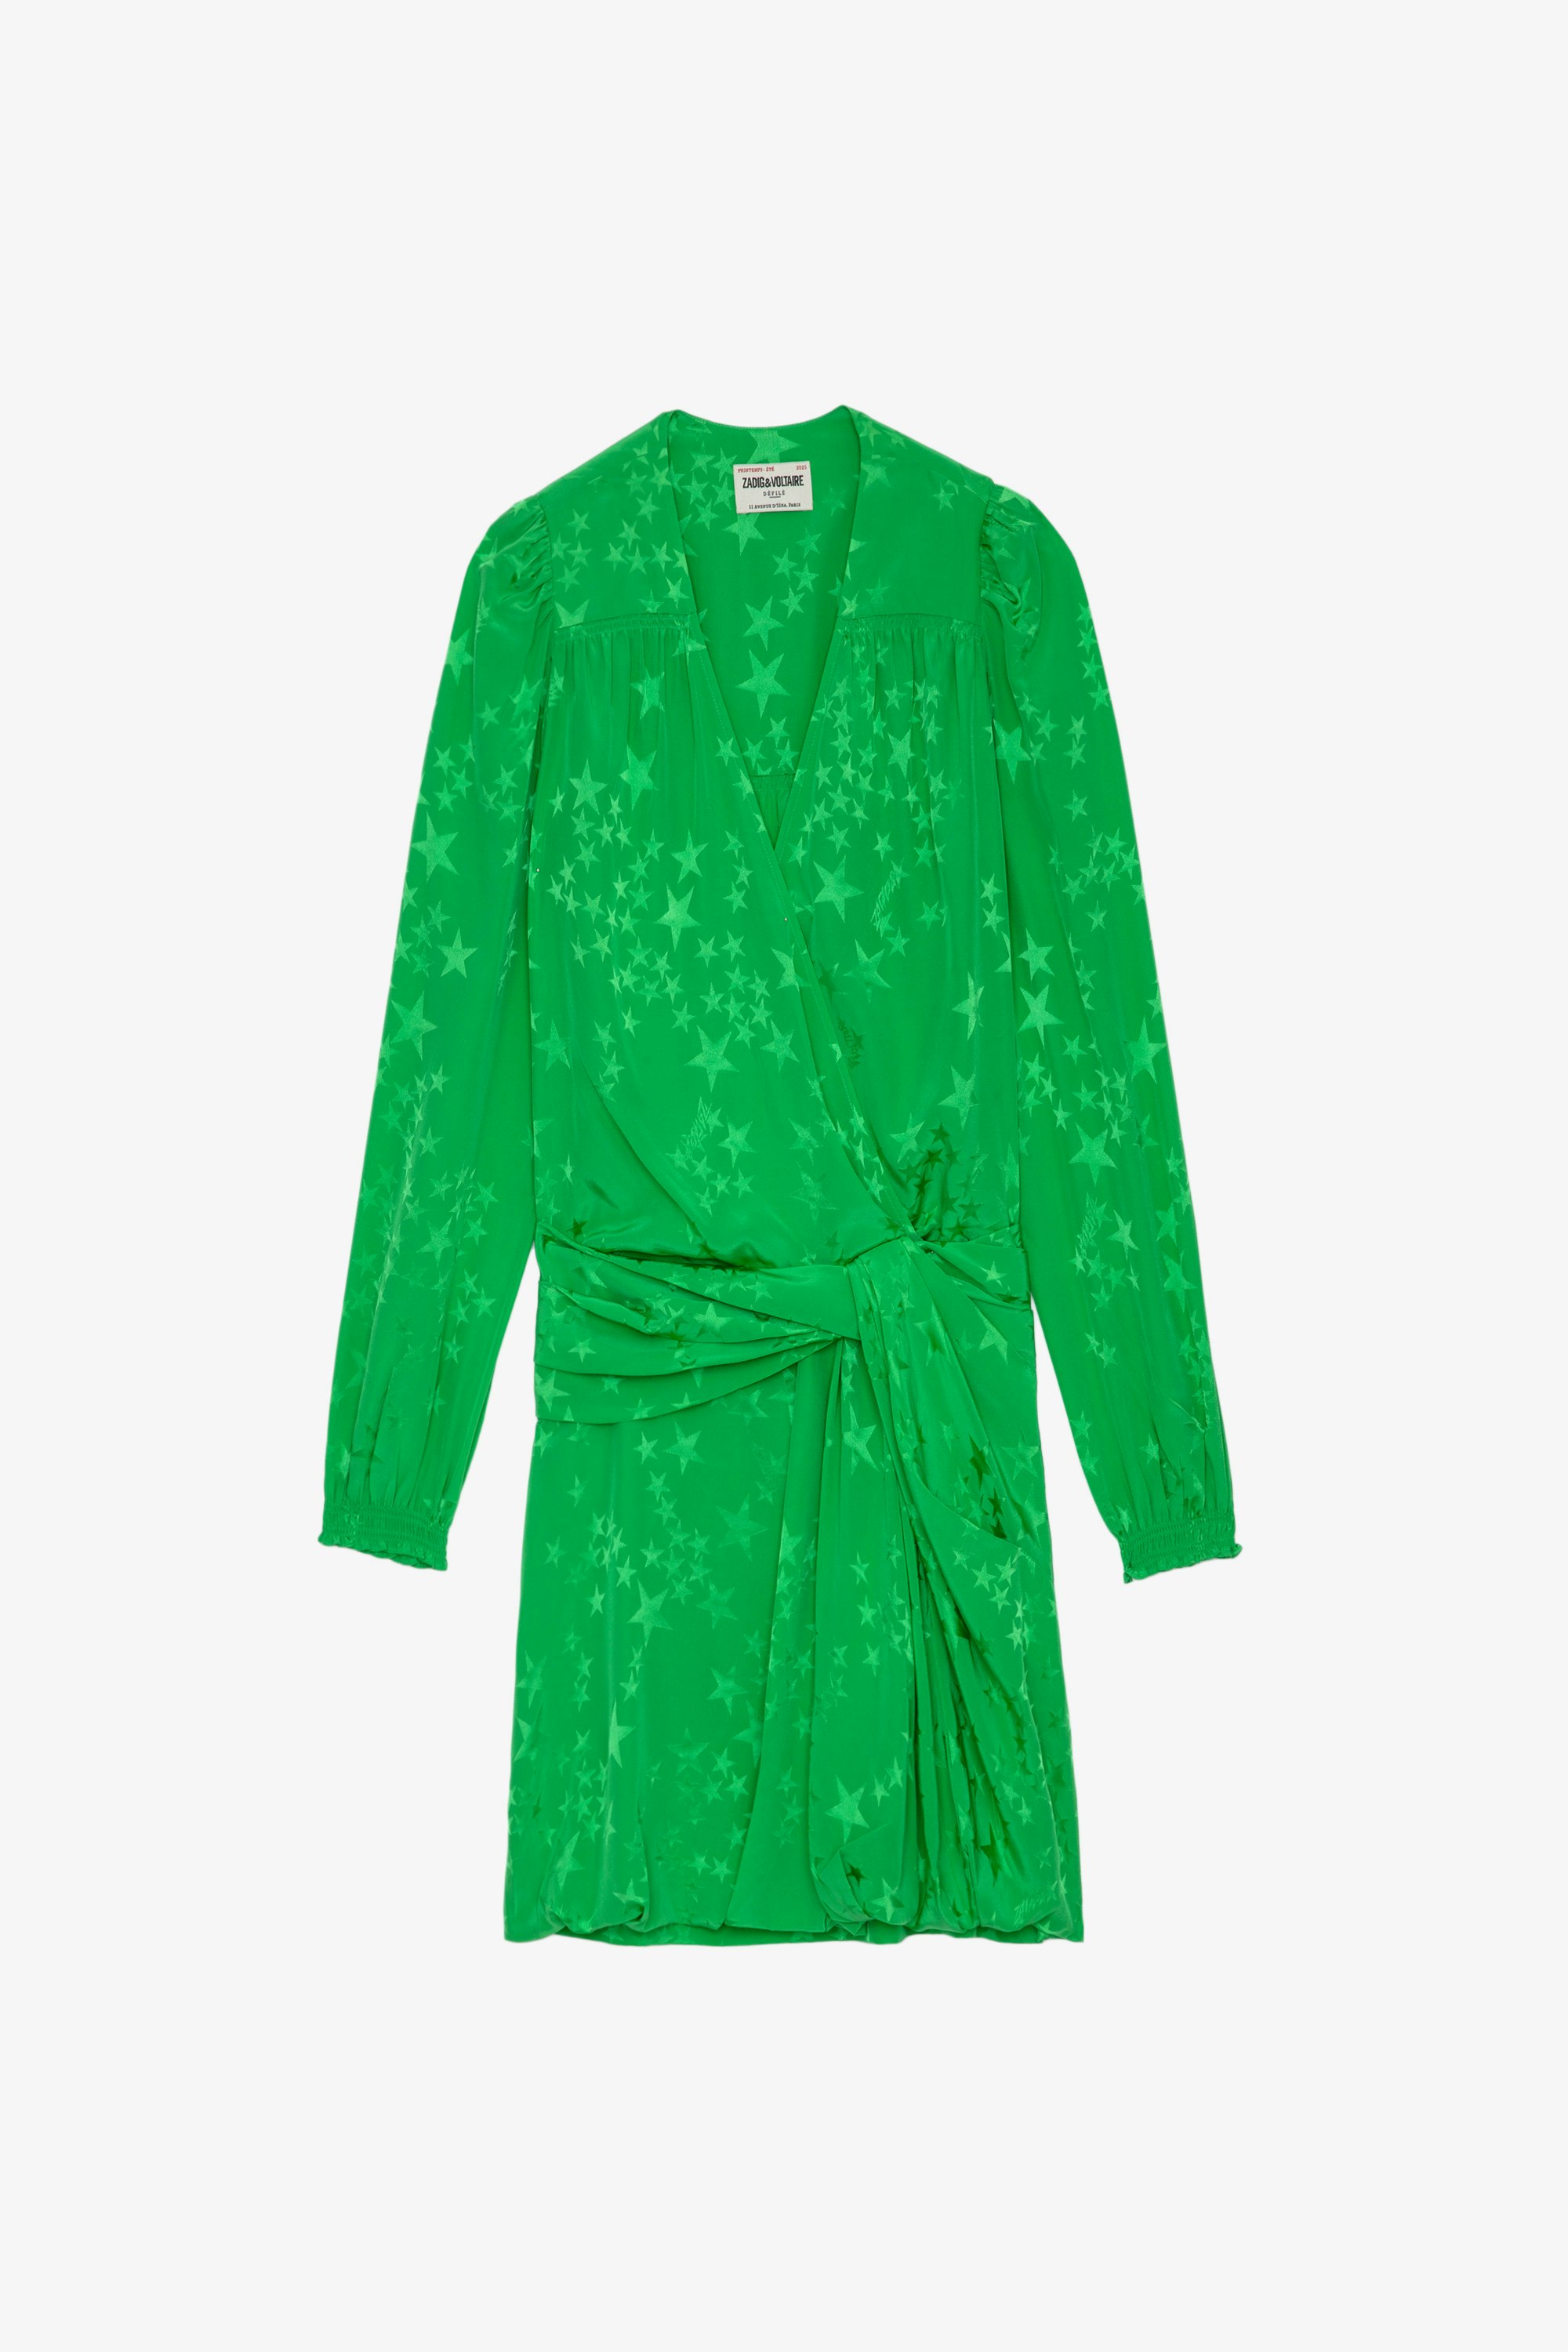 Recol Jacquard Silk Dress Women’s apple green silk jacquard mini dress with draped effect, embellished with stars and tied at the waist